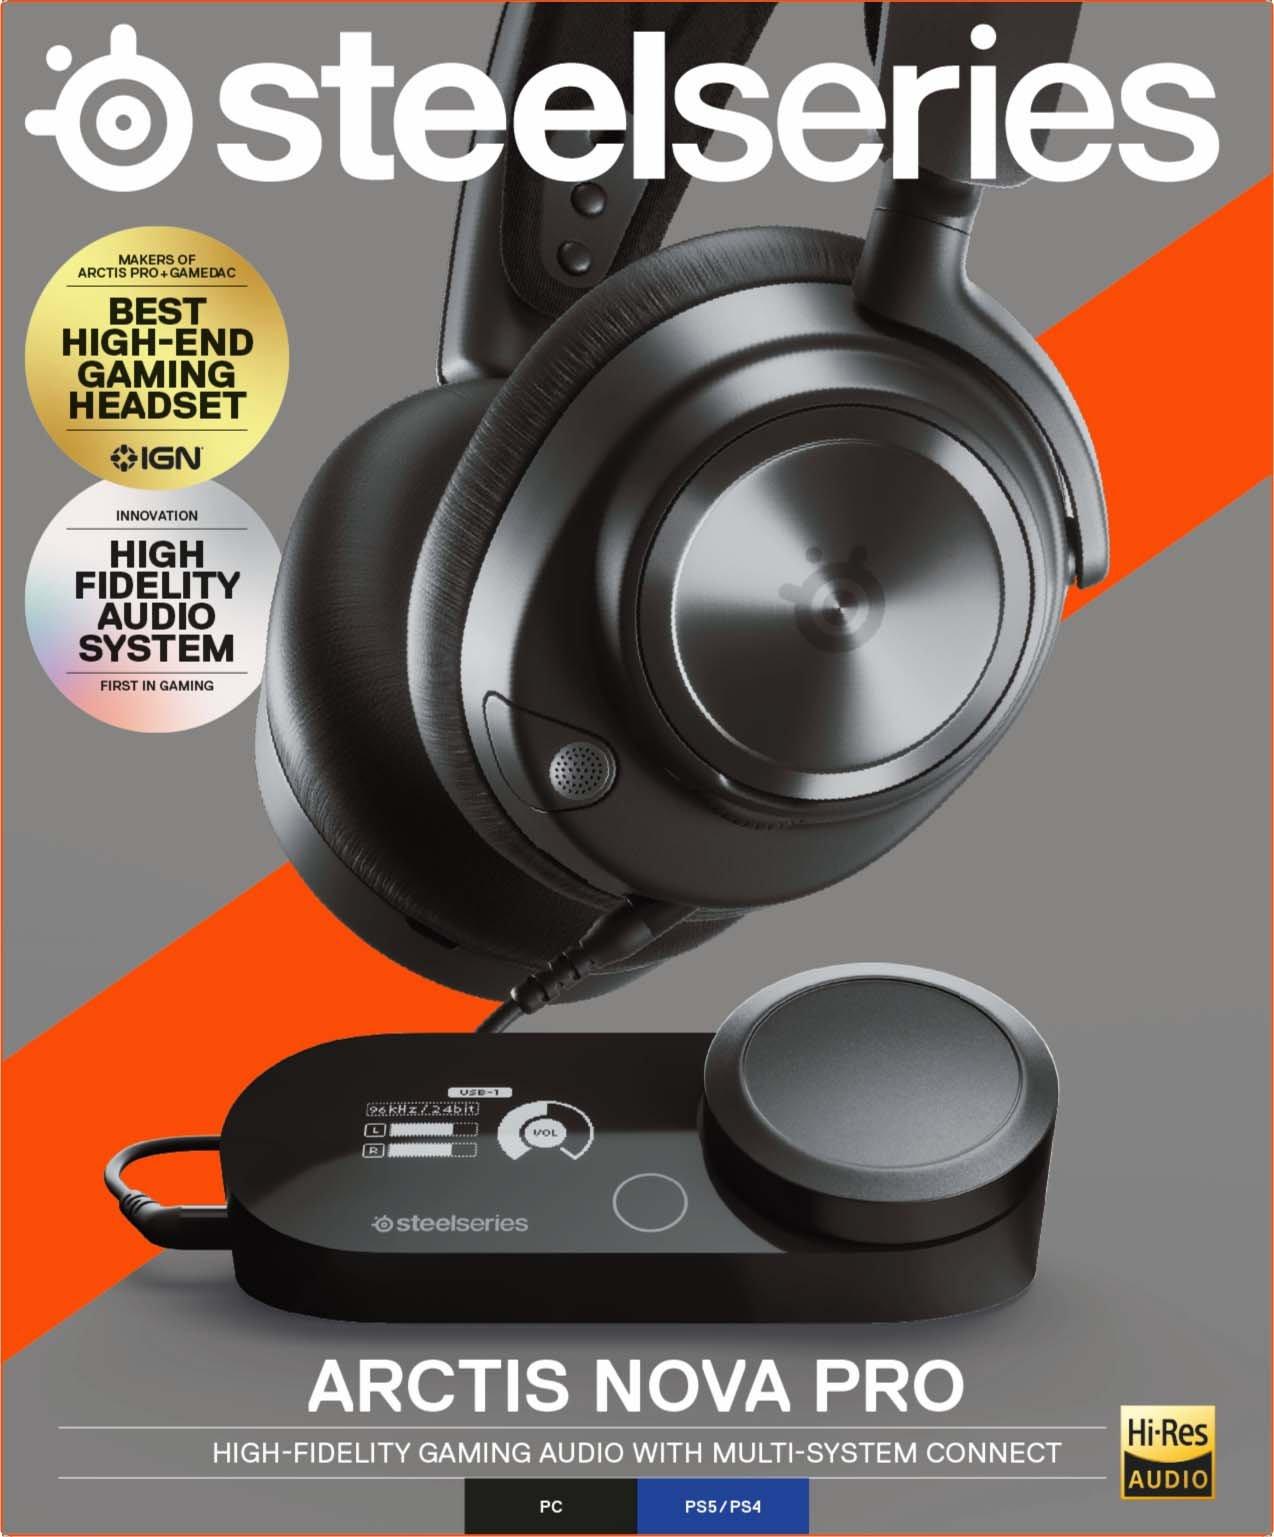 Arctis Nova Pro Wireless for PC, PlayStation, VR, Switch, Mobile, and more